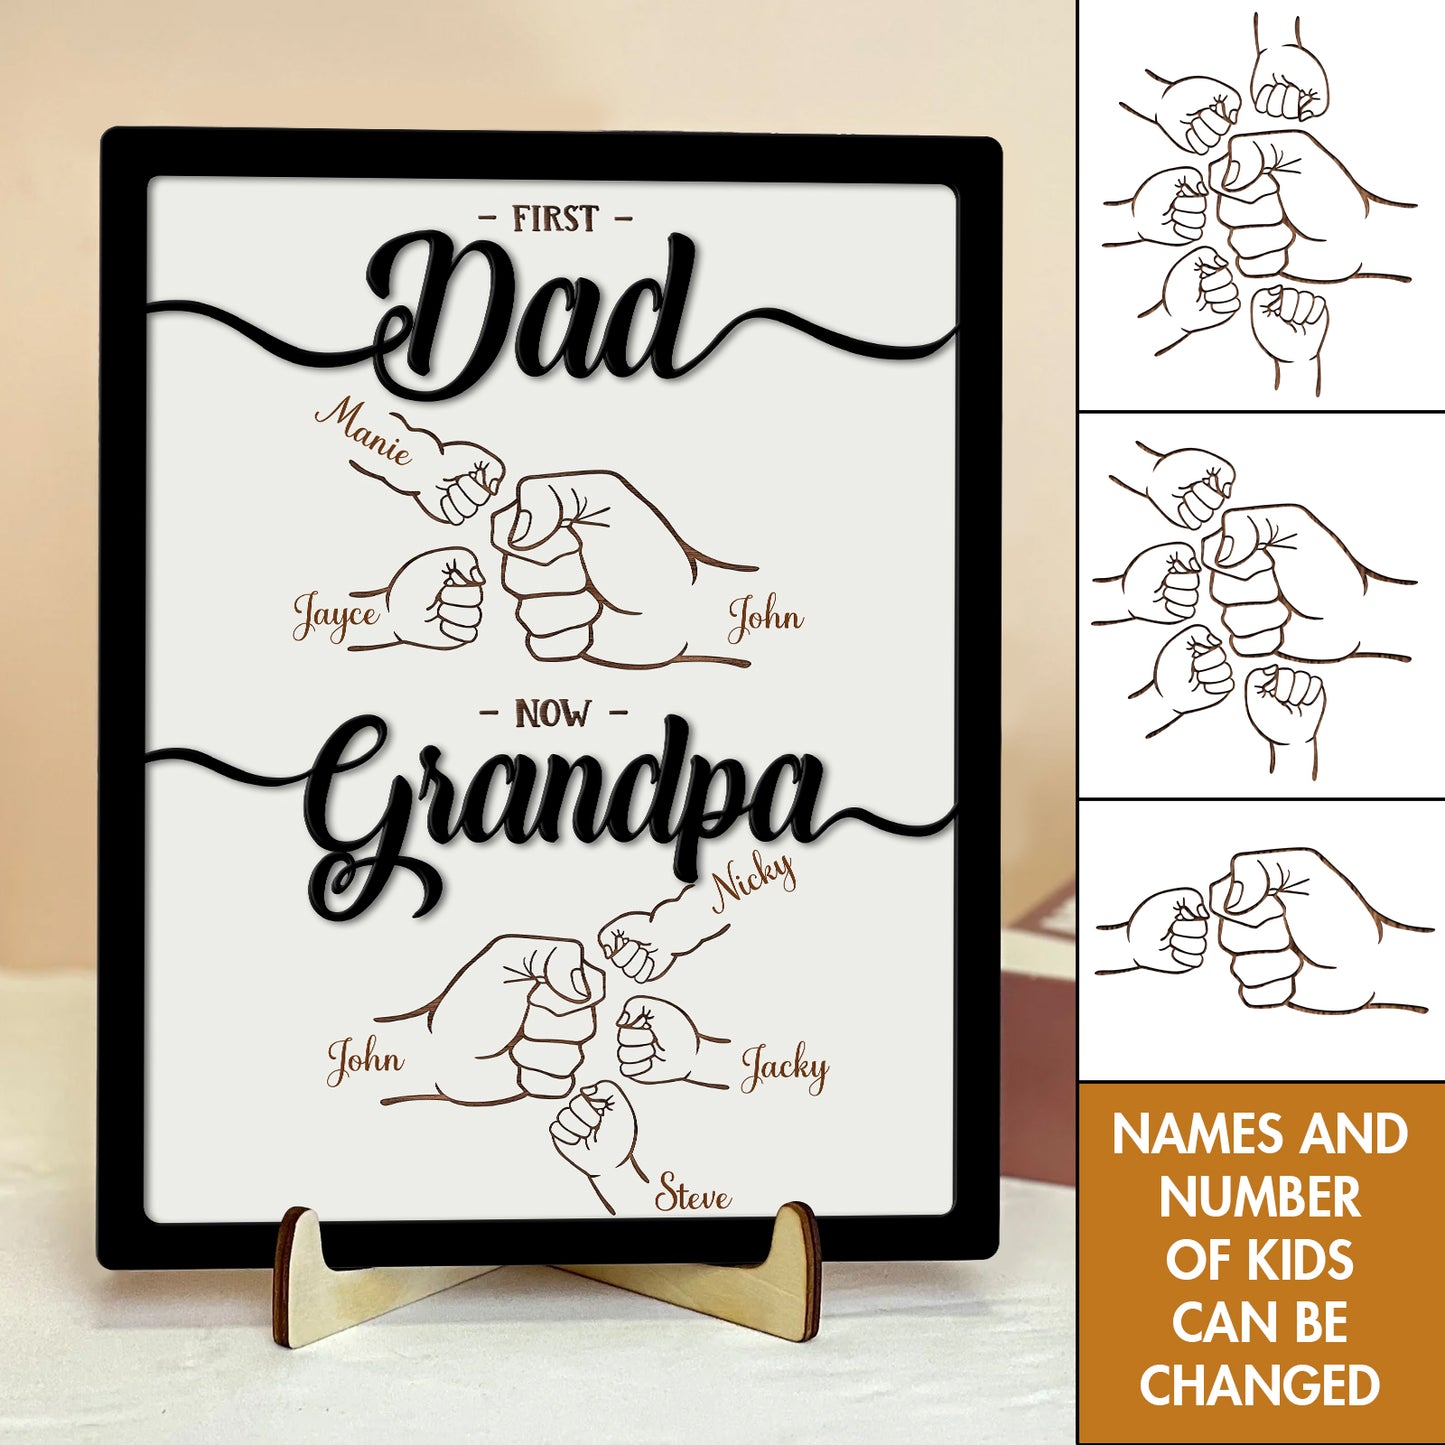 Father - First dad, now grandpa - Personalized Wooden Layers Plaque